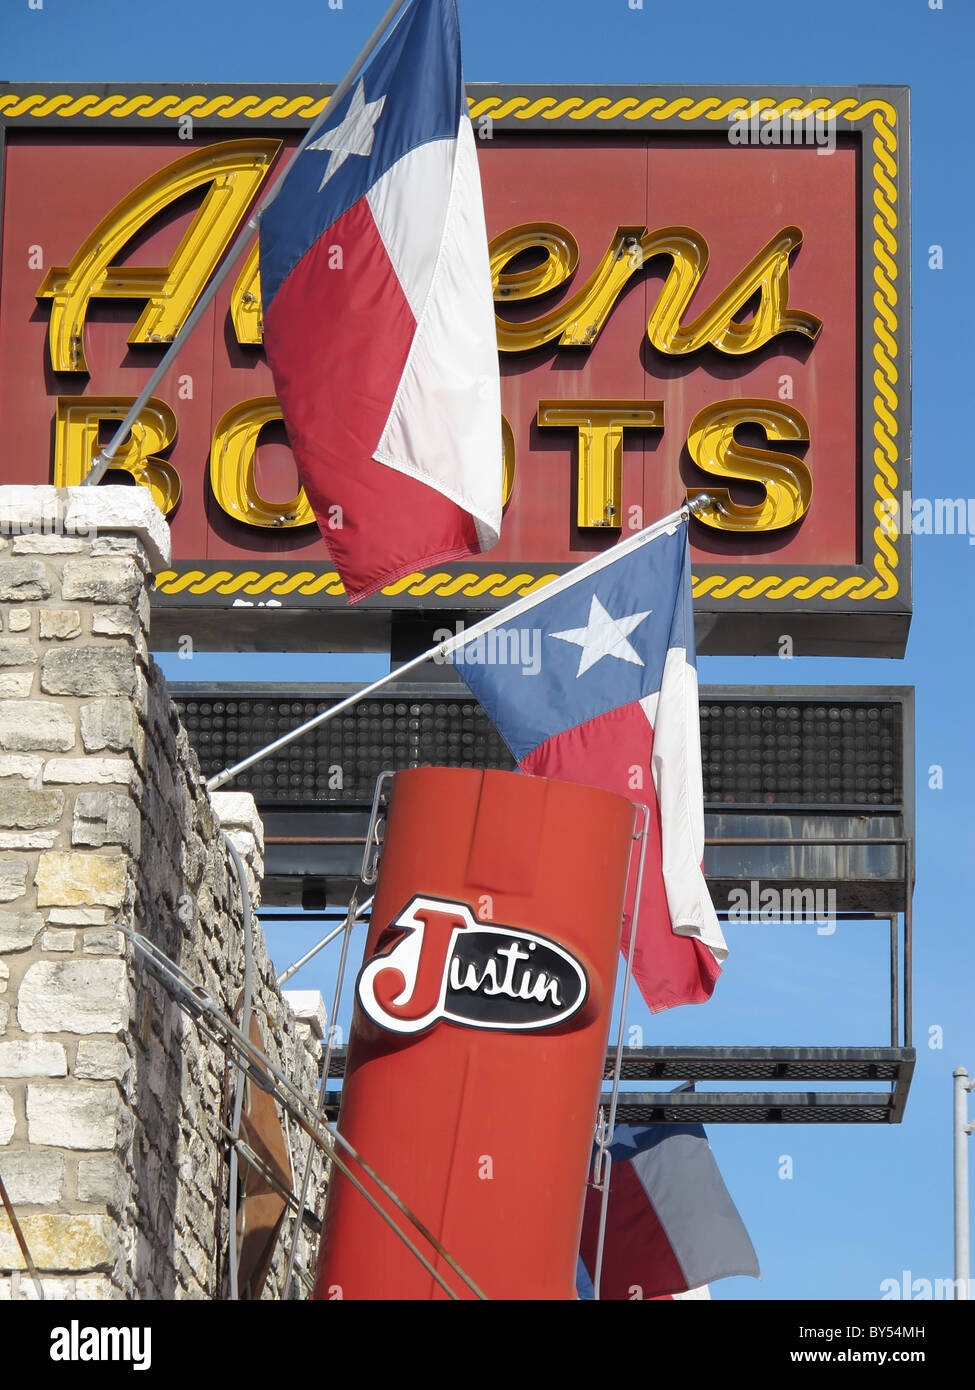 COWBOY BOOTS Banner Sign NEW Larger 2X5 Red White Blue for Shoe Store 